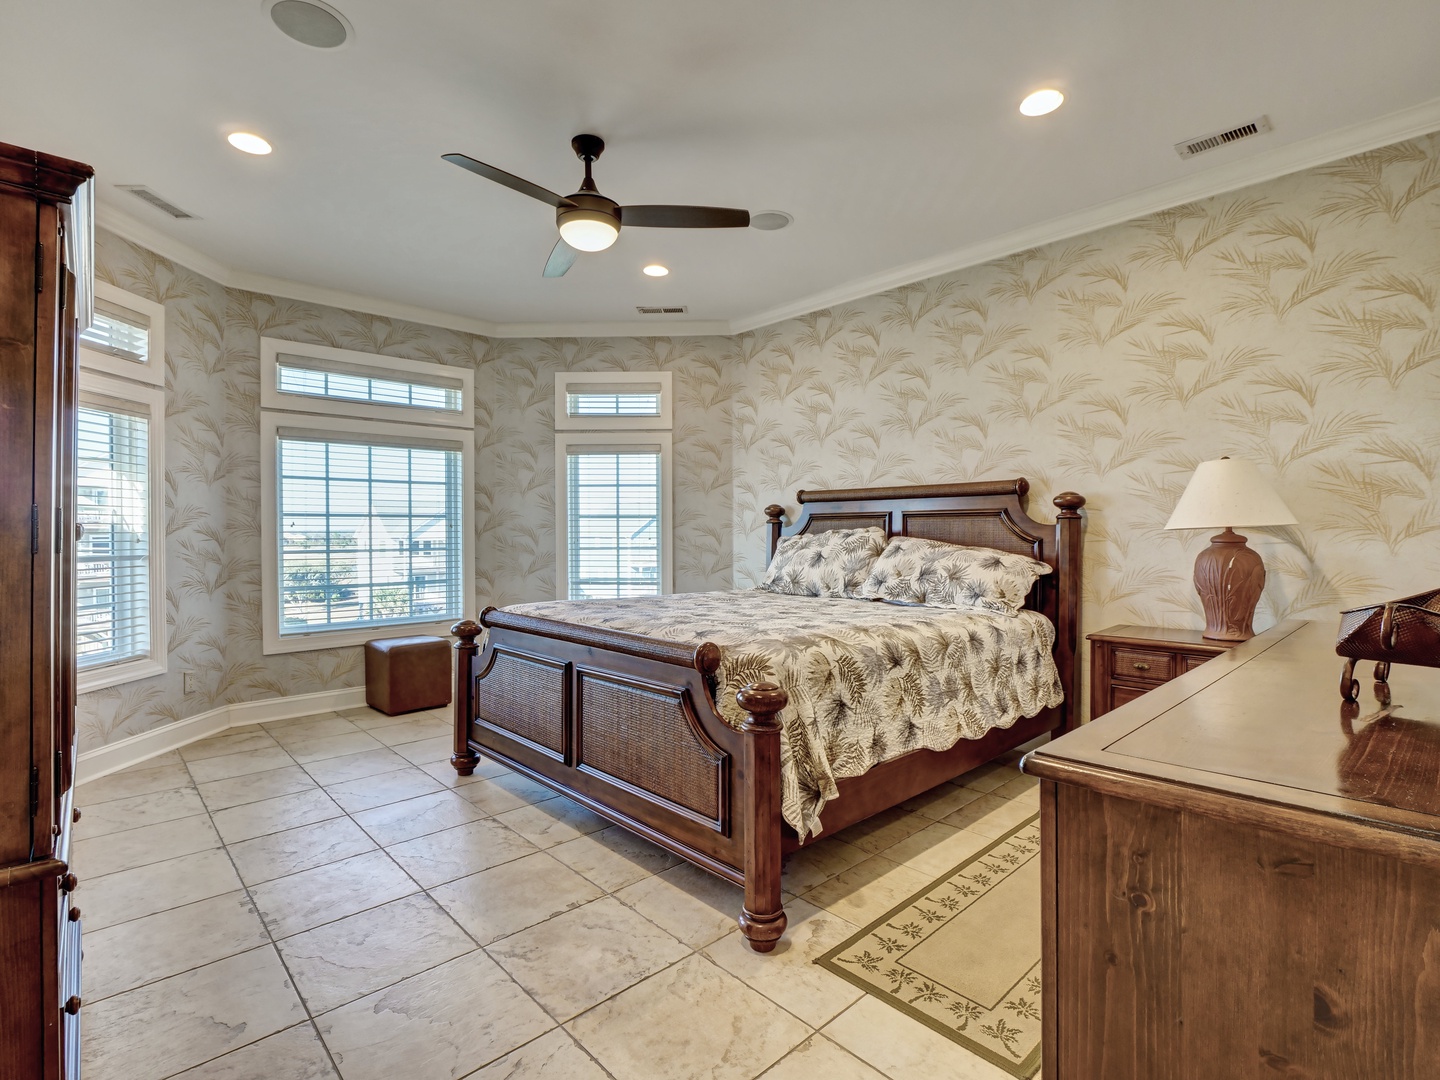 A third floor guest bedroom with a king-sized bed